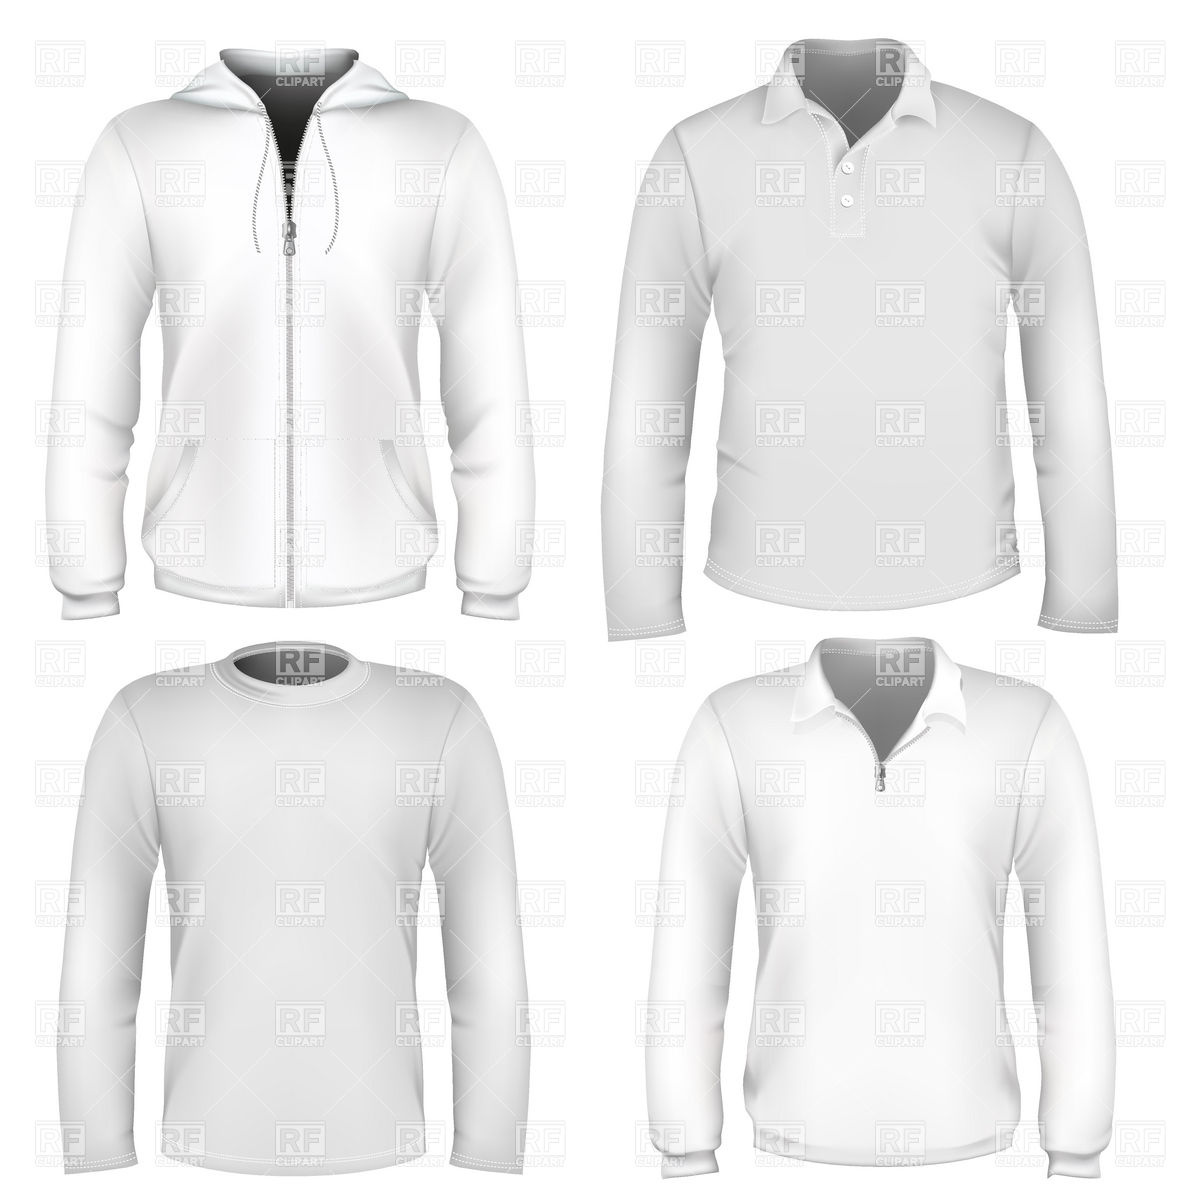     Sportswear Design Templates   Hoodie Sweater And Polo Shirt Vector